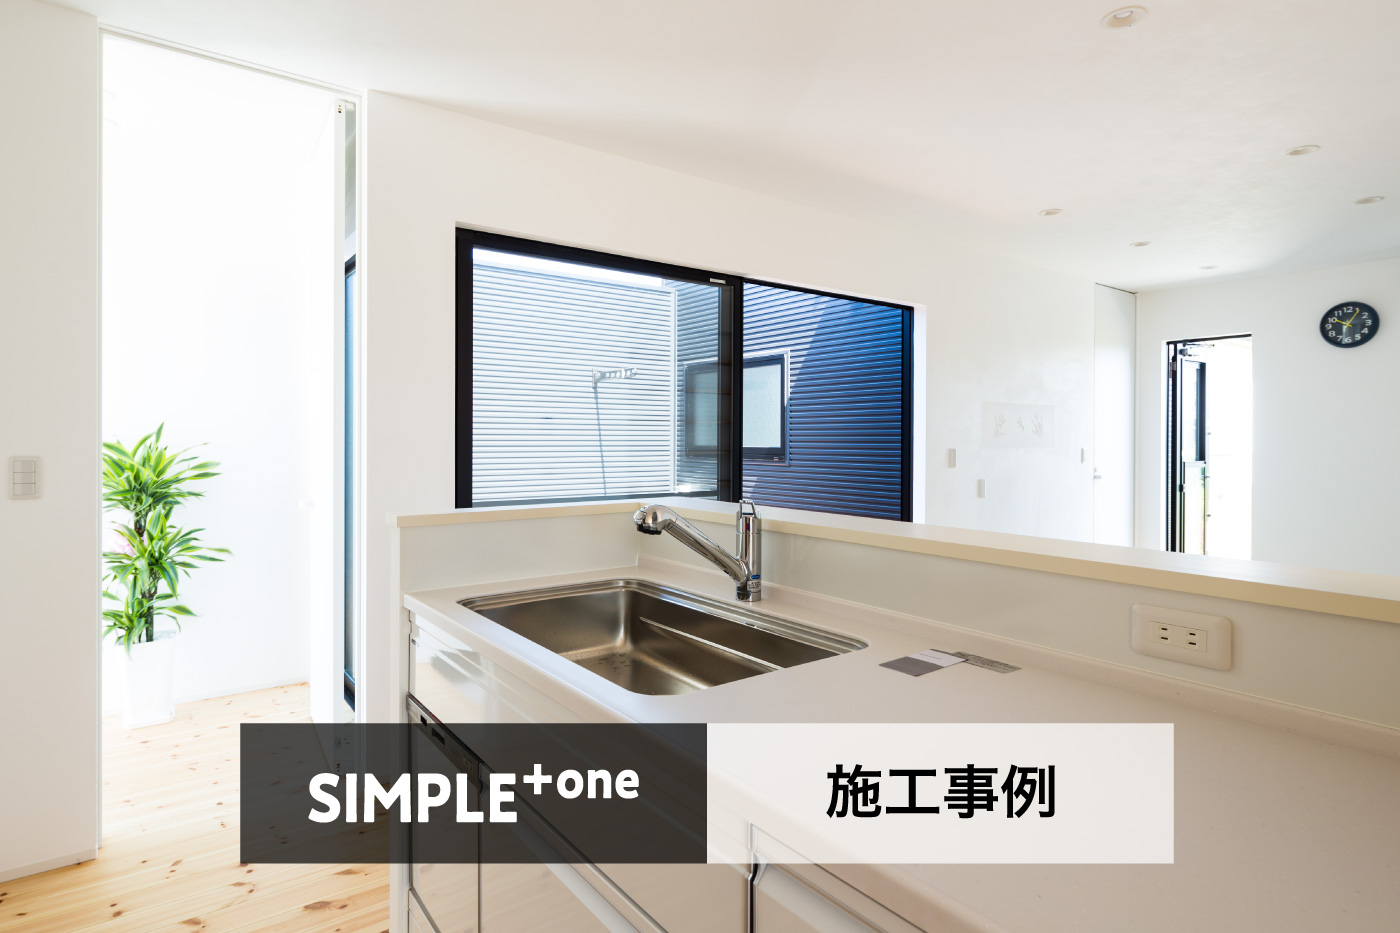 SIMPLE+one 施工事例